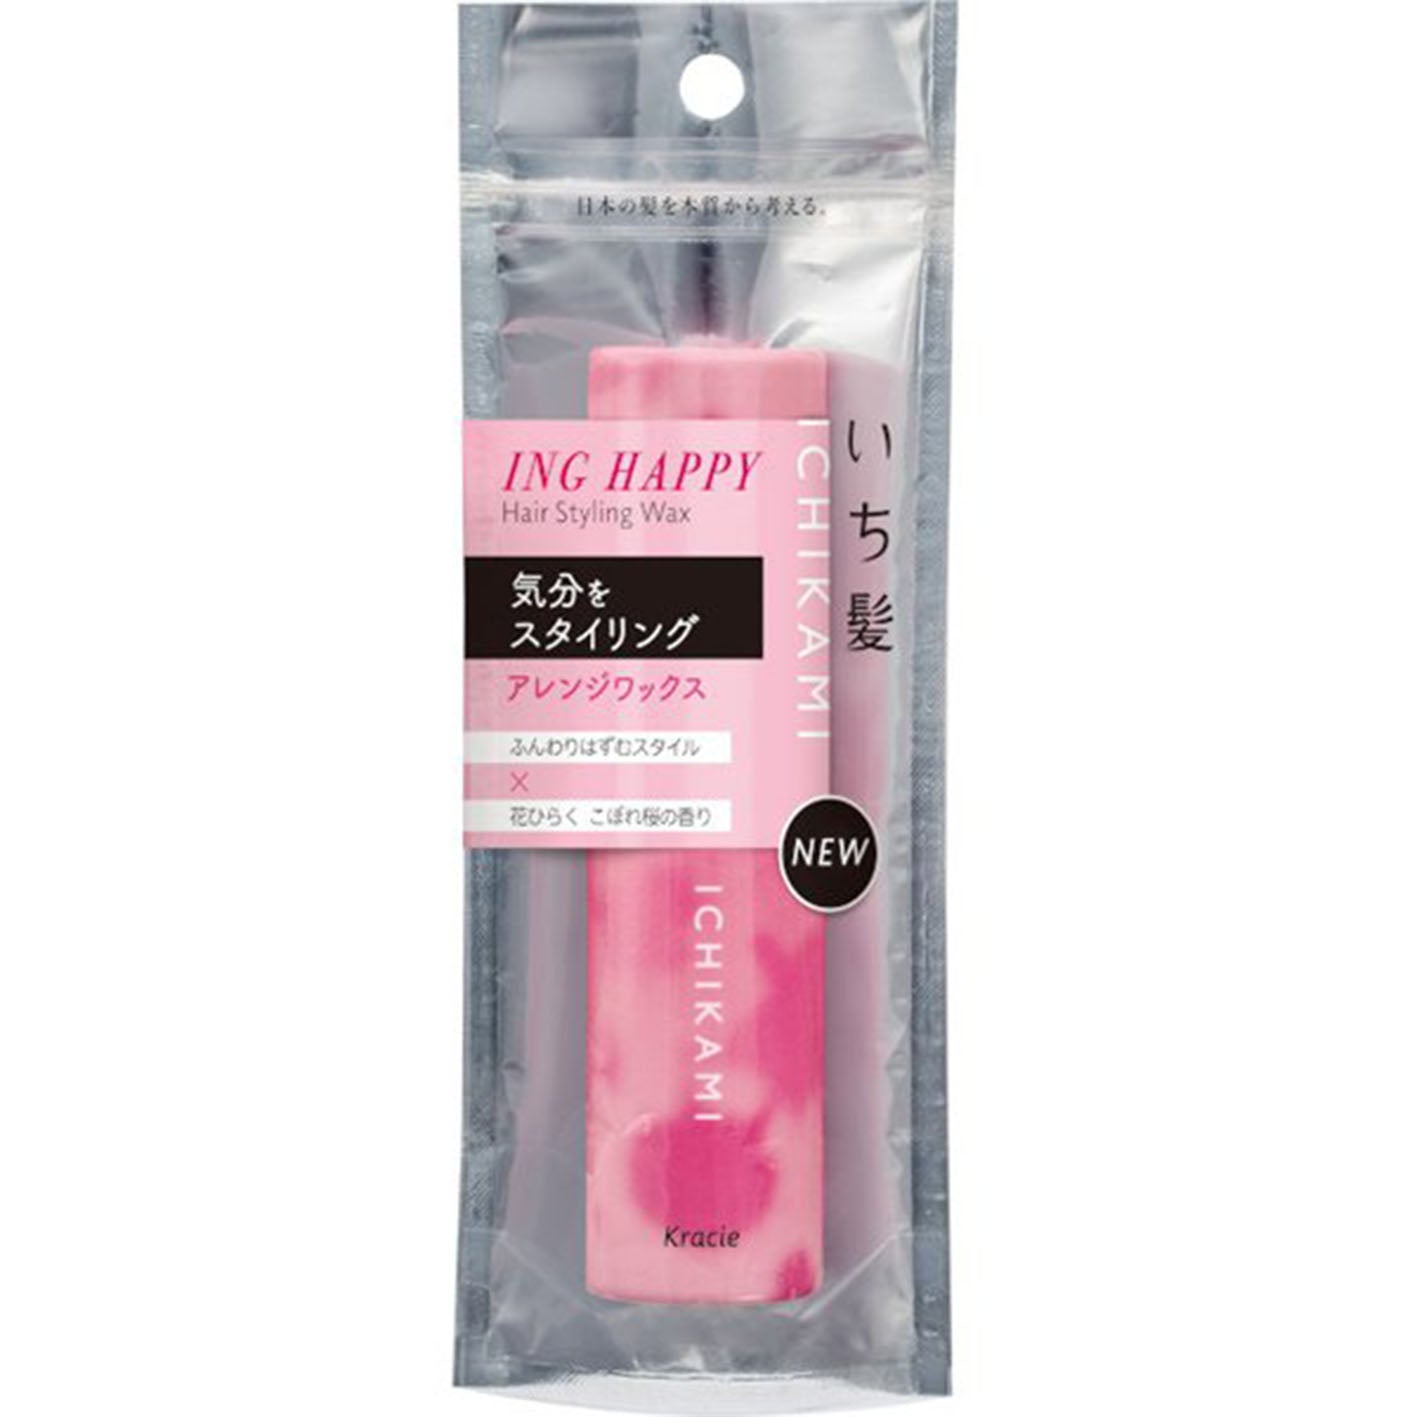 Ichikami ING HAPPY Arrangement Wax 28g - Harajuku Culture Japan - Japanease Products Store Beauty and Stationery